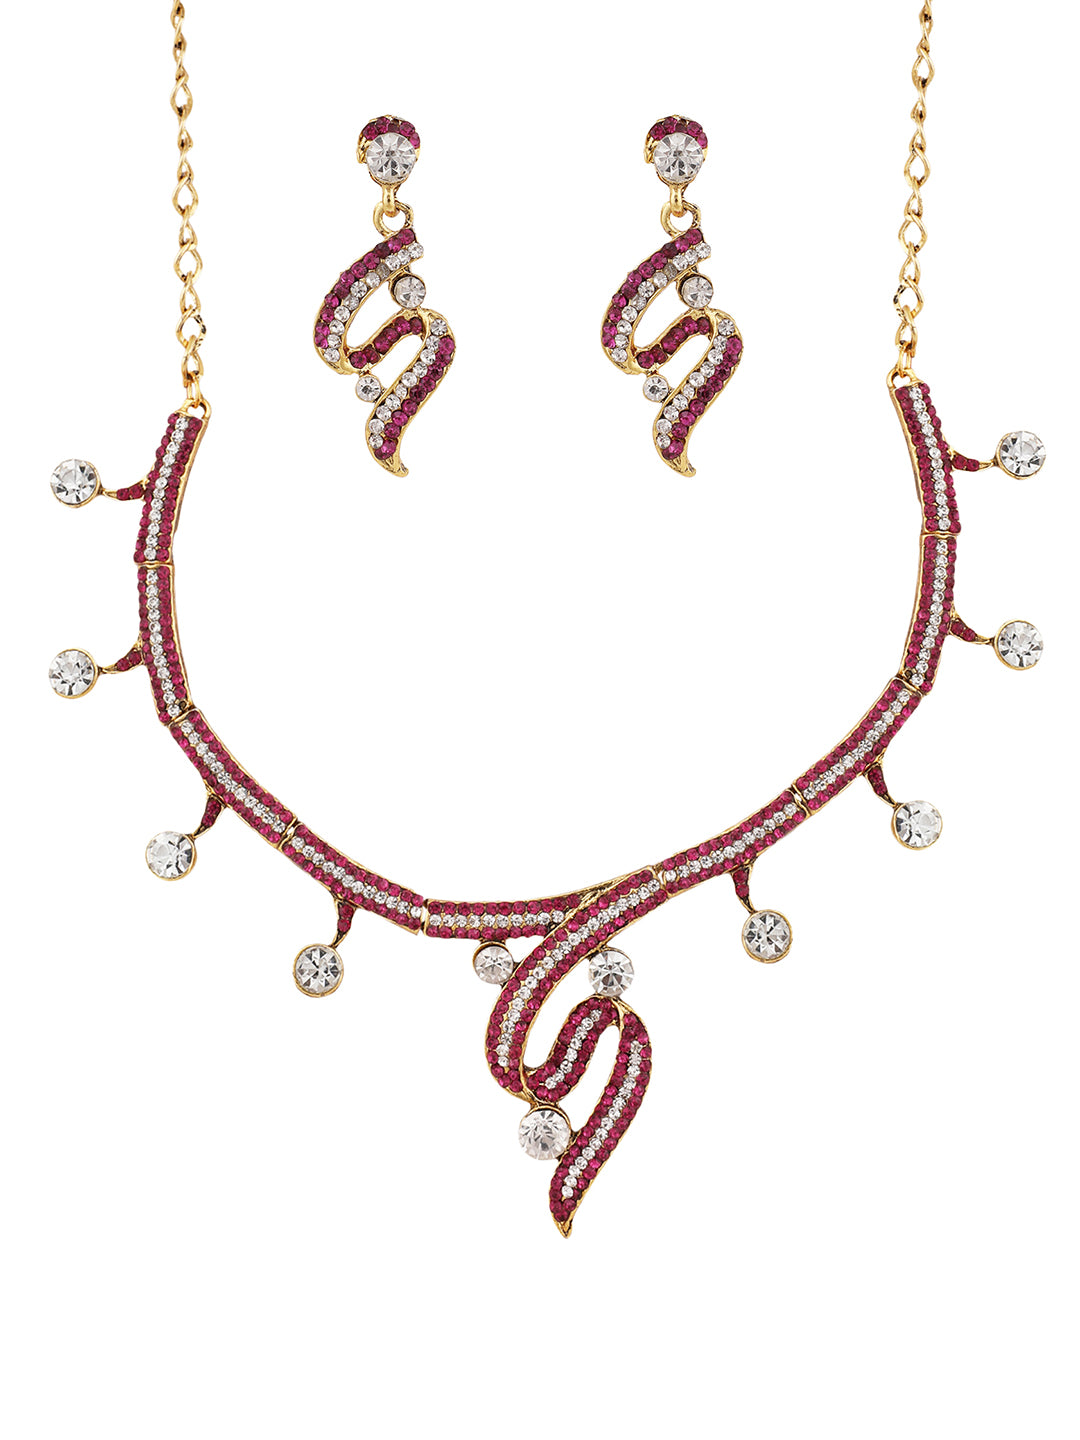 Women's Gold Plated Red & White Stone Studded Jewellery Set - Anikas Creation